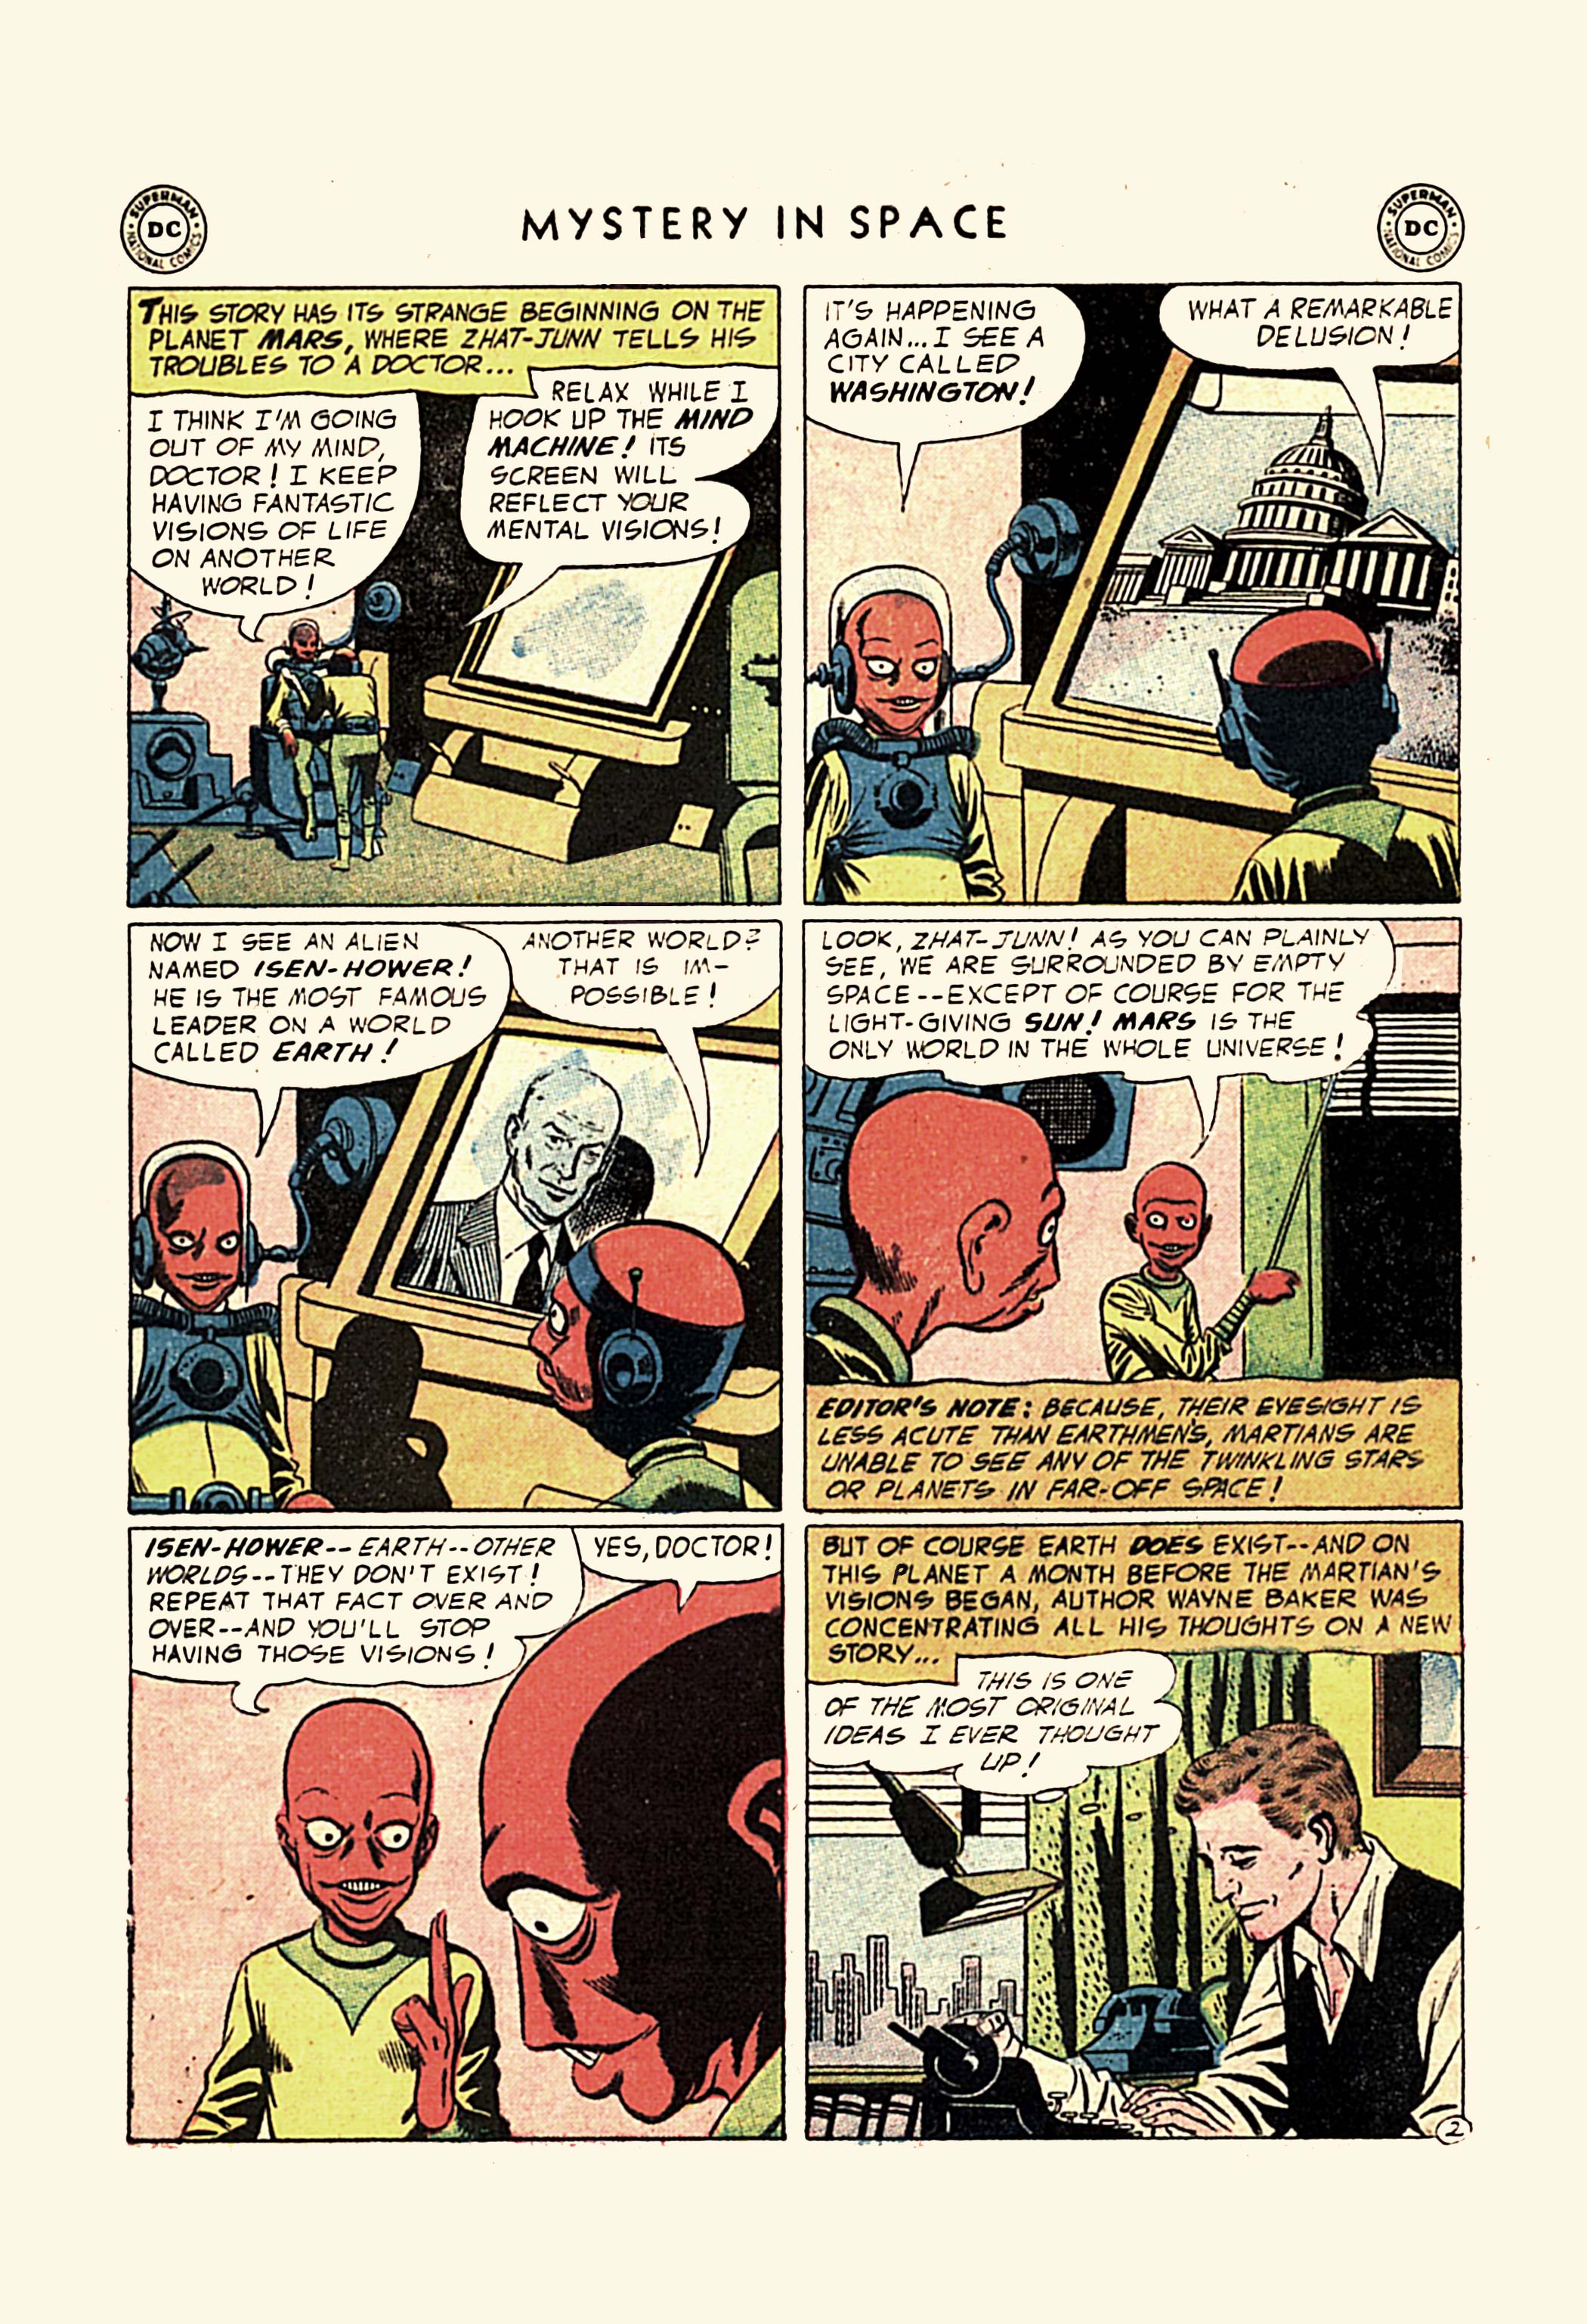 Mystery in Space (1951) 30 Page 3